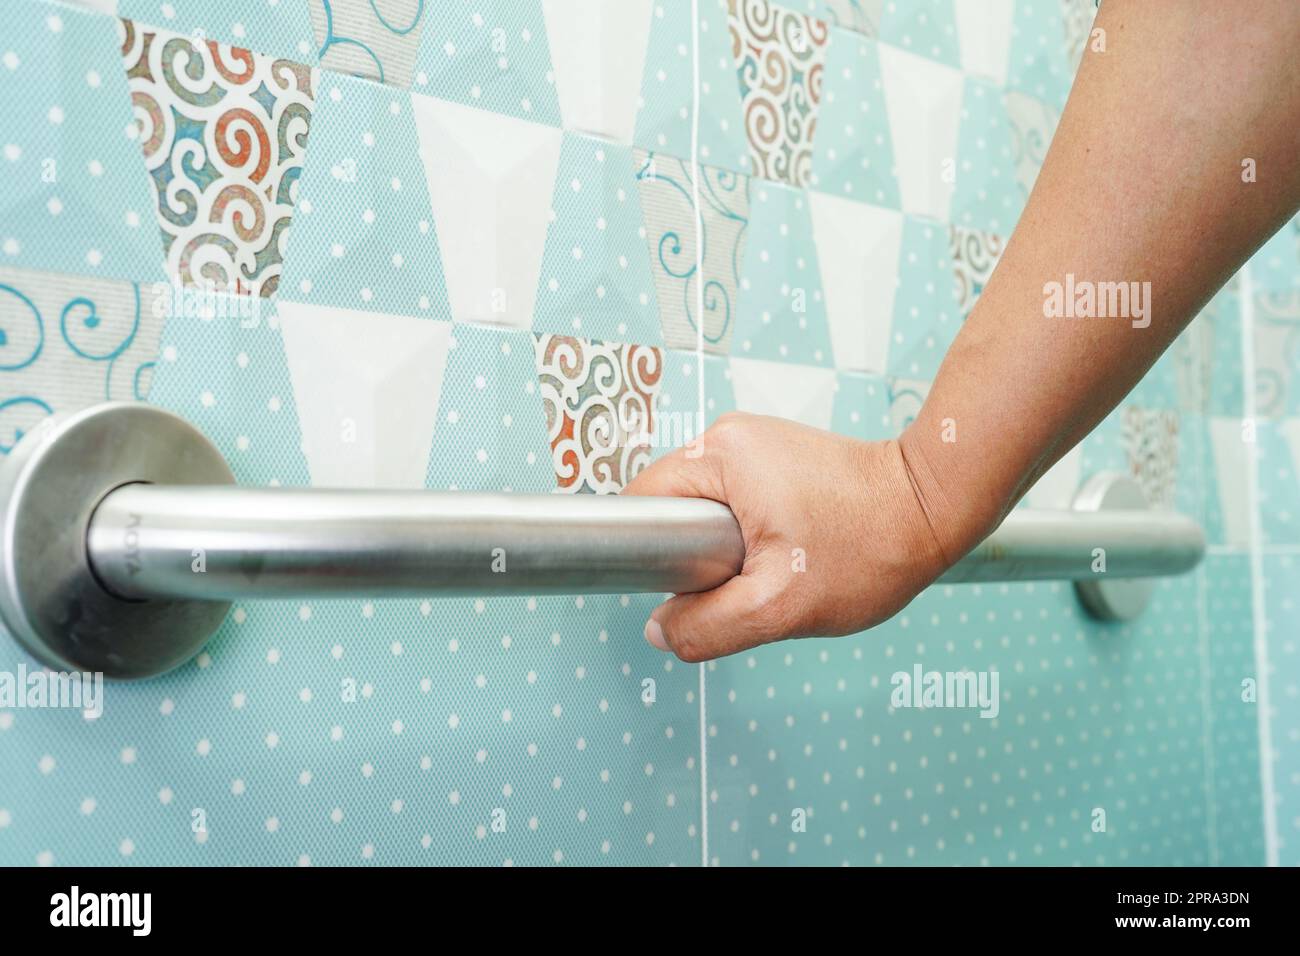 Asian woman patient use toilet support rail in bathroom, handrail safety grab bar, security in nursing hospital. Stock Photo